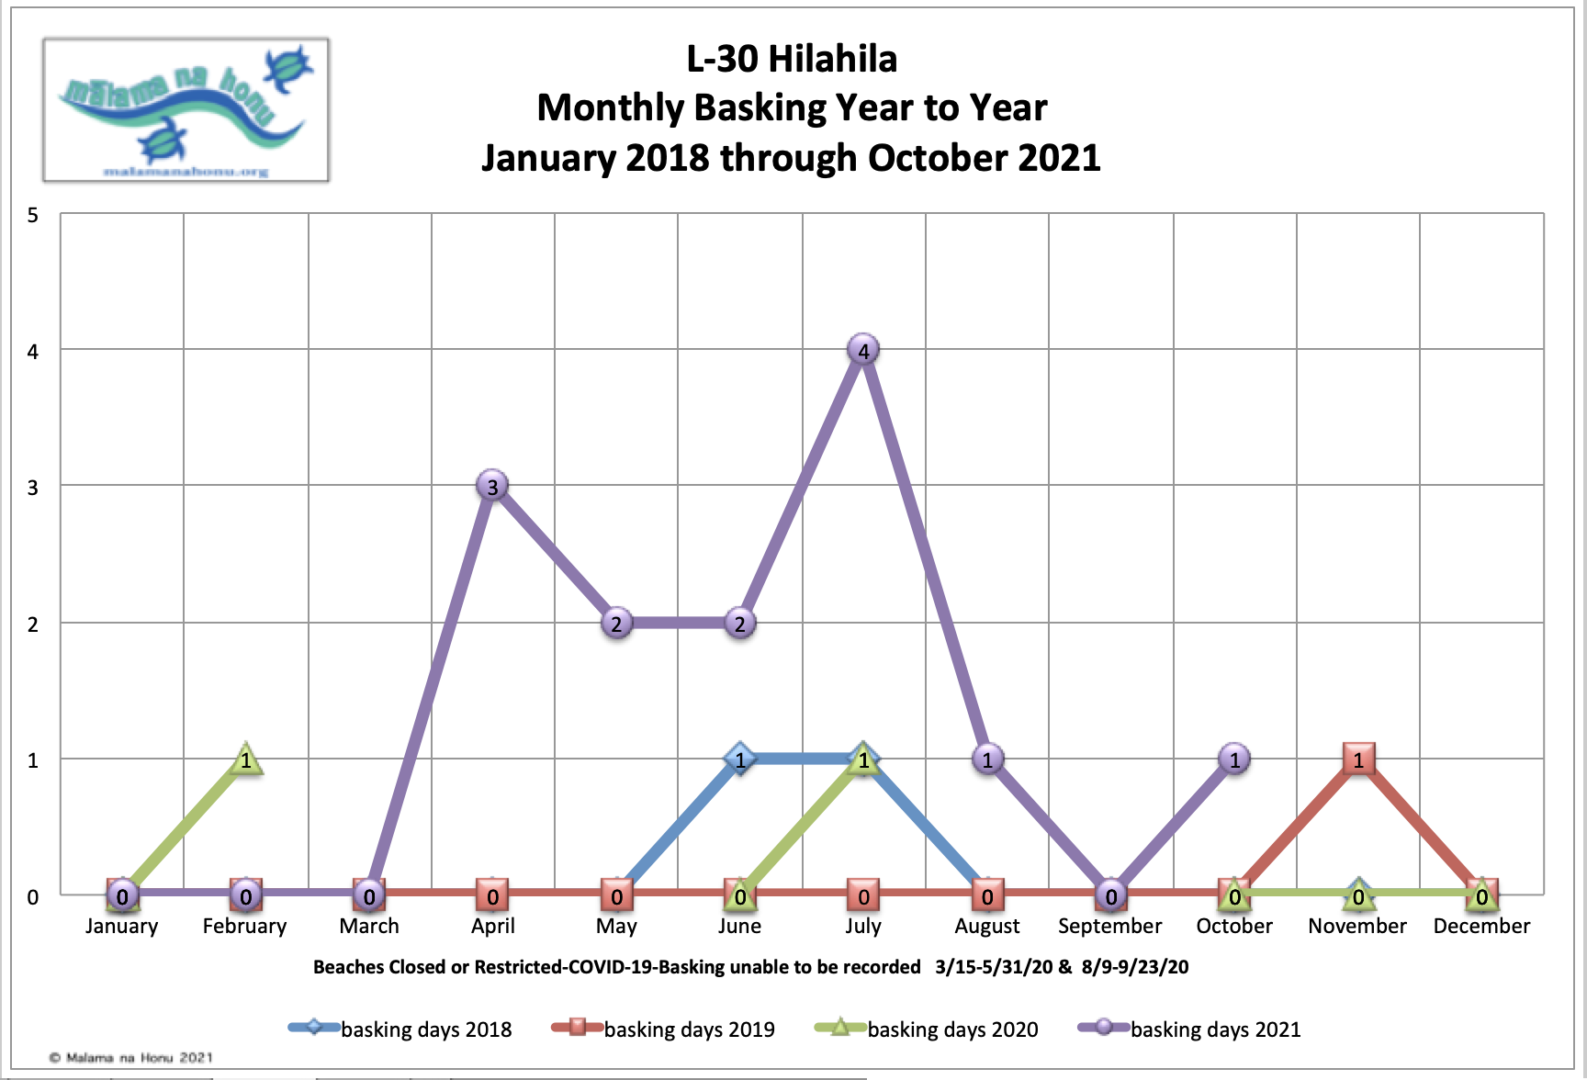 L-30 Hilahila Monthly Basking Year to Year January 2018 through October 2021